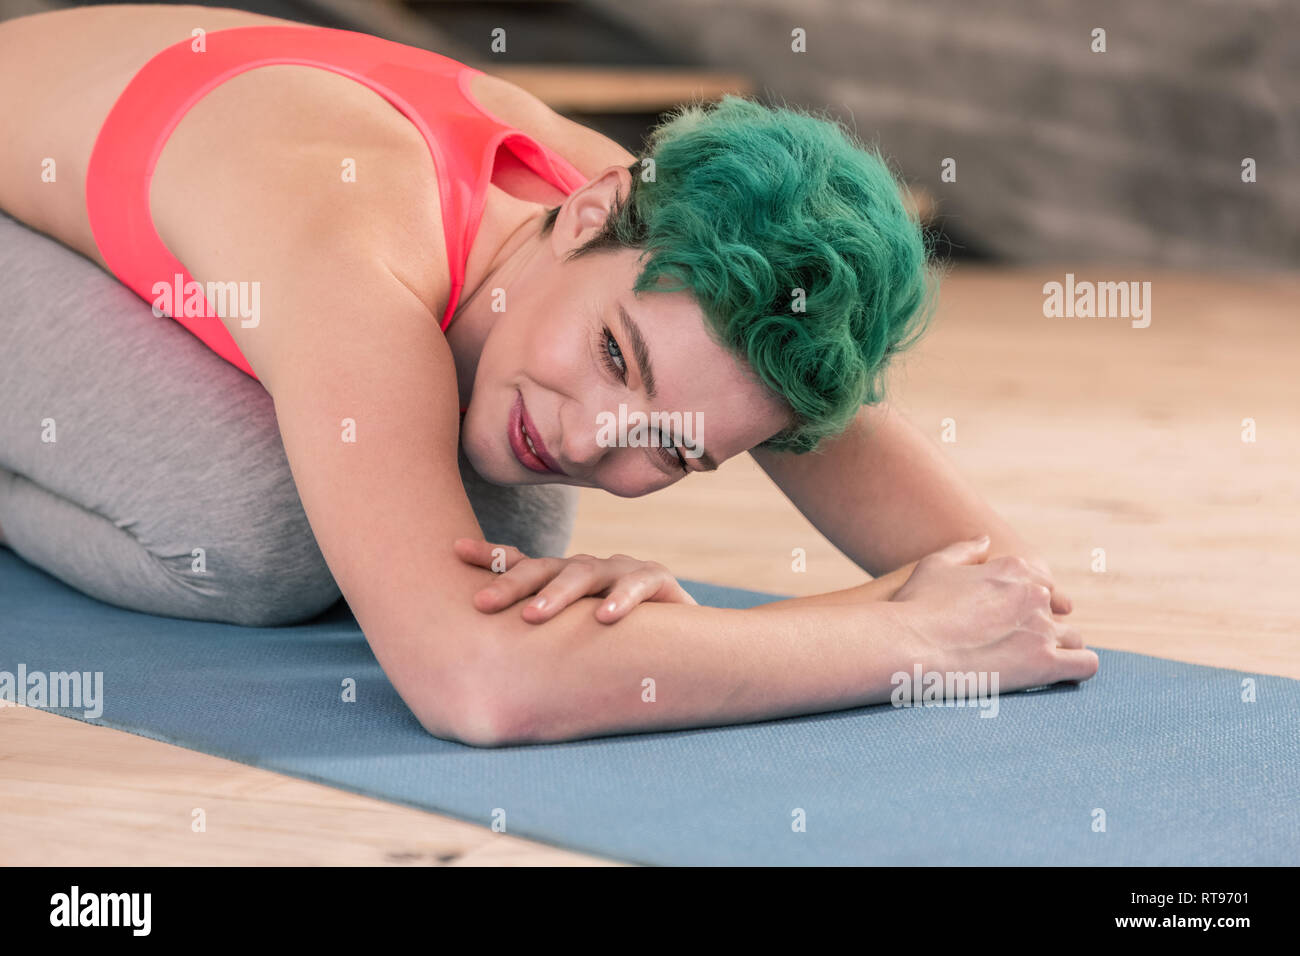 Green-haired woman wearing sport clothes stretching after fitness Stock Photo